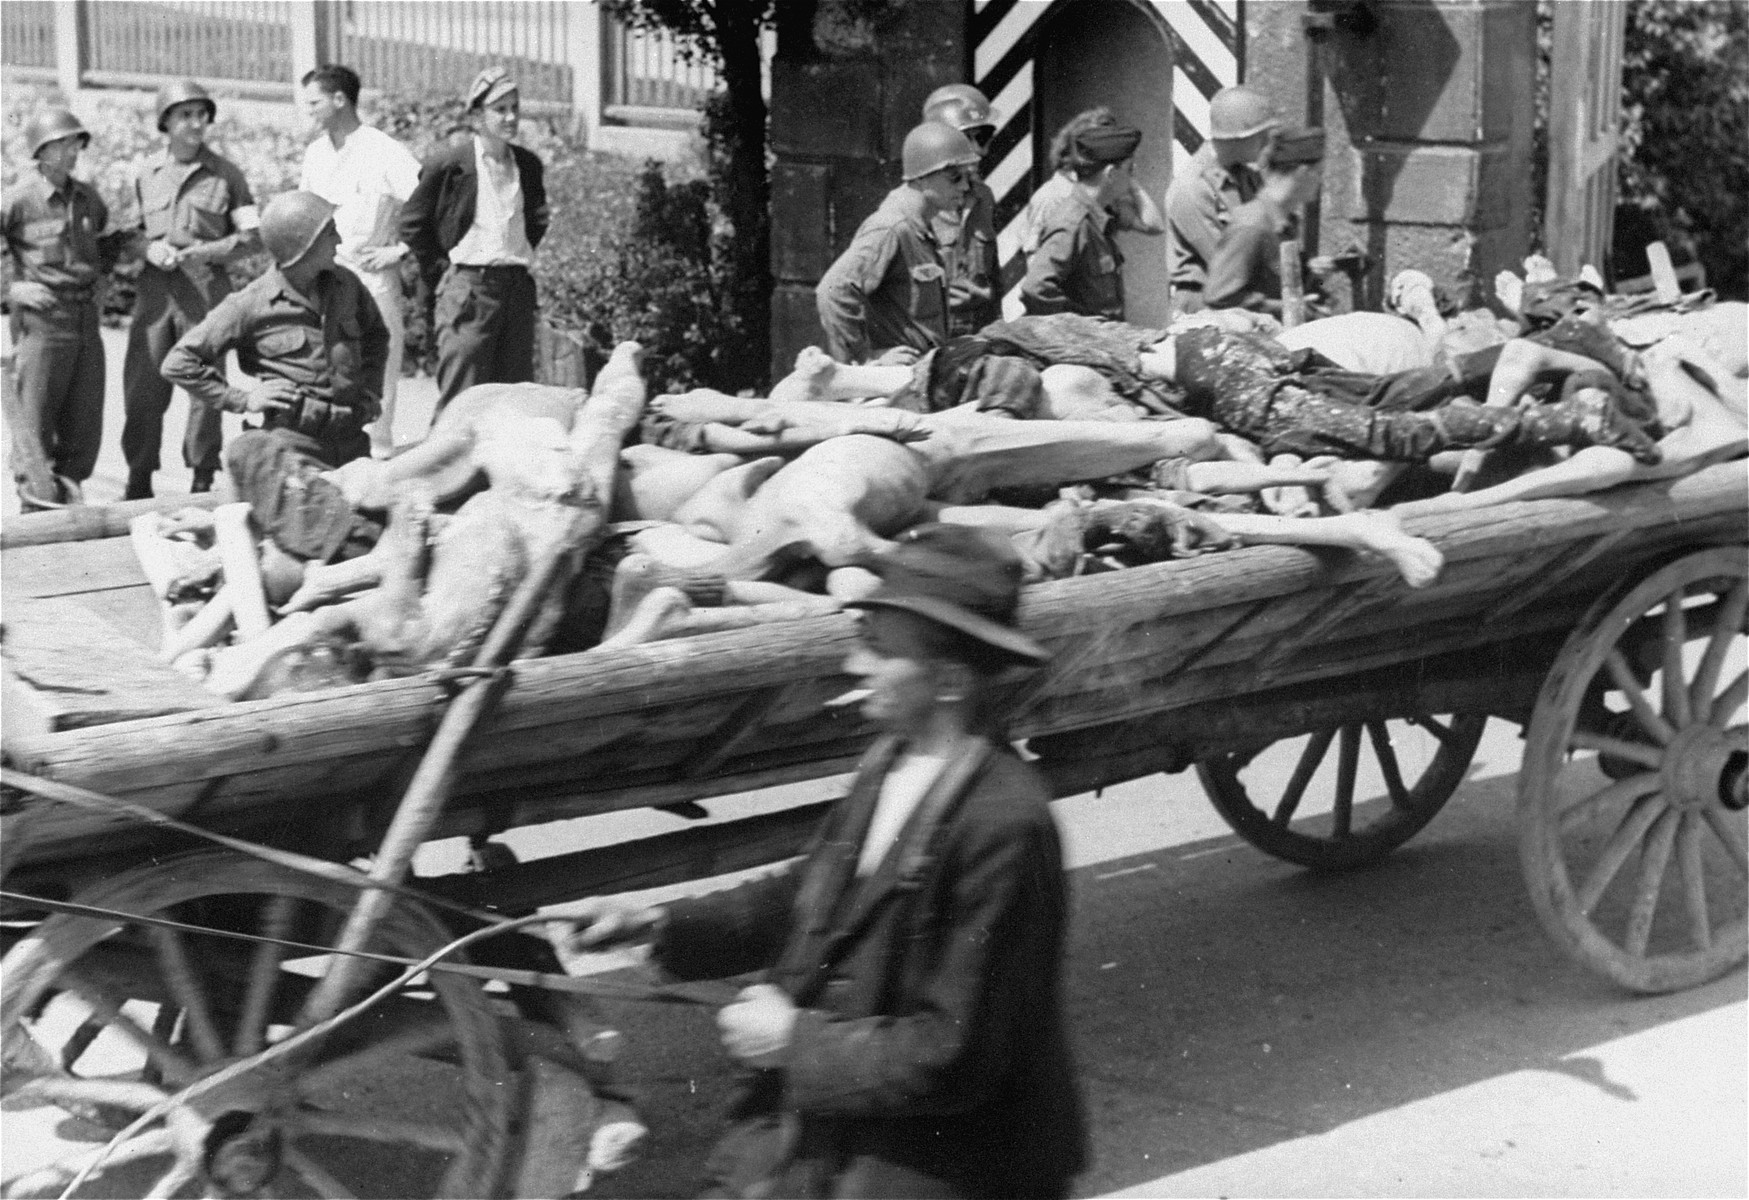 American soldiers watch a passing cart laden with corpses intended for burial leave the compound of the Dachau concentration camp.  Allied authorities required local farmers to drive their loaded carts through the town of Dachau as an education for the inhabitants.